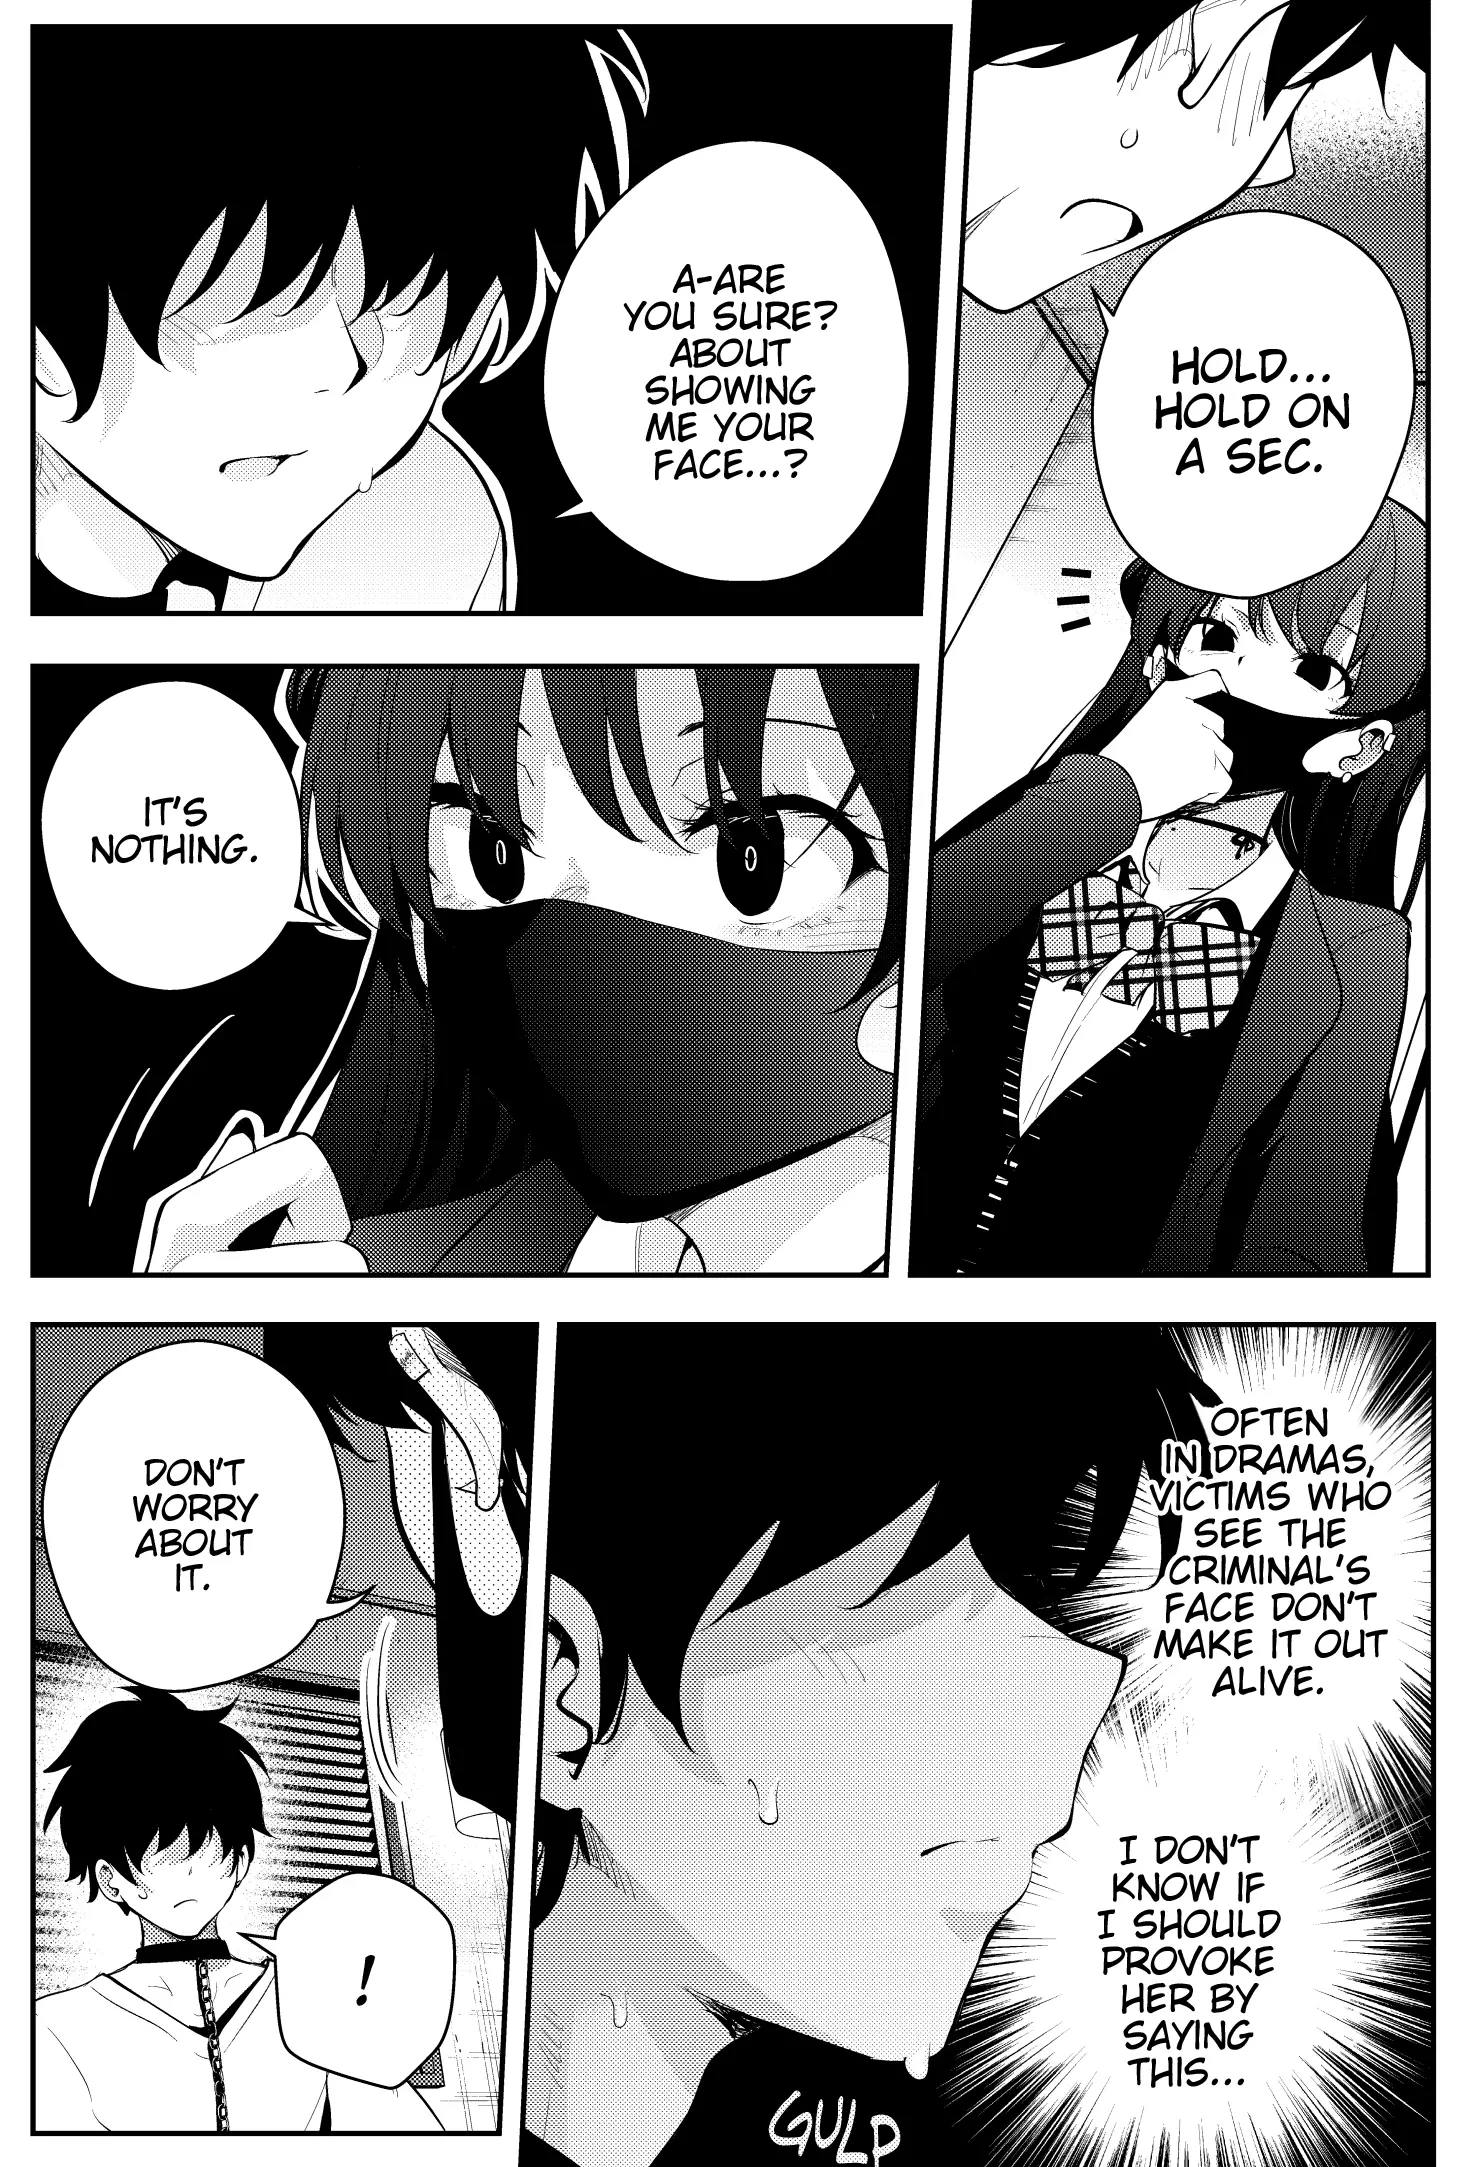 The Story Of A Manga Artist Confined By A Strange High School Girl - 13 page 3-43e8a106